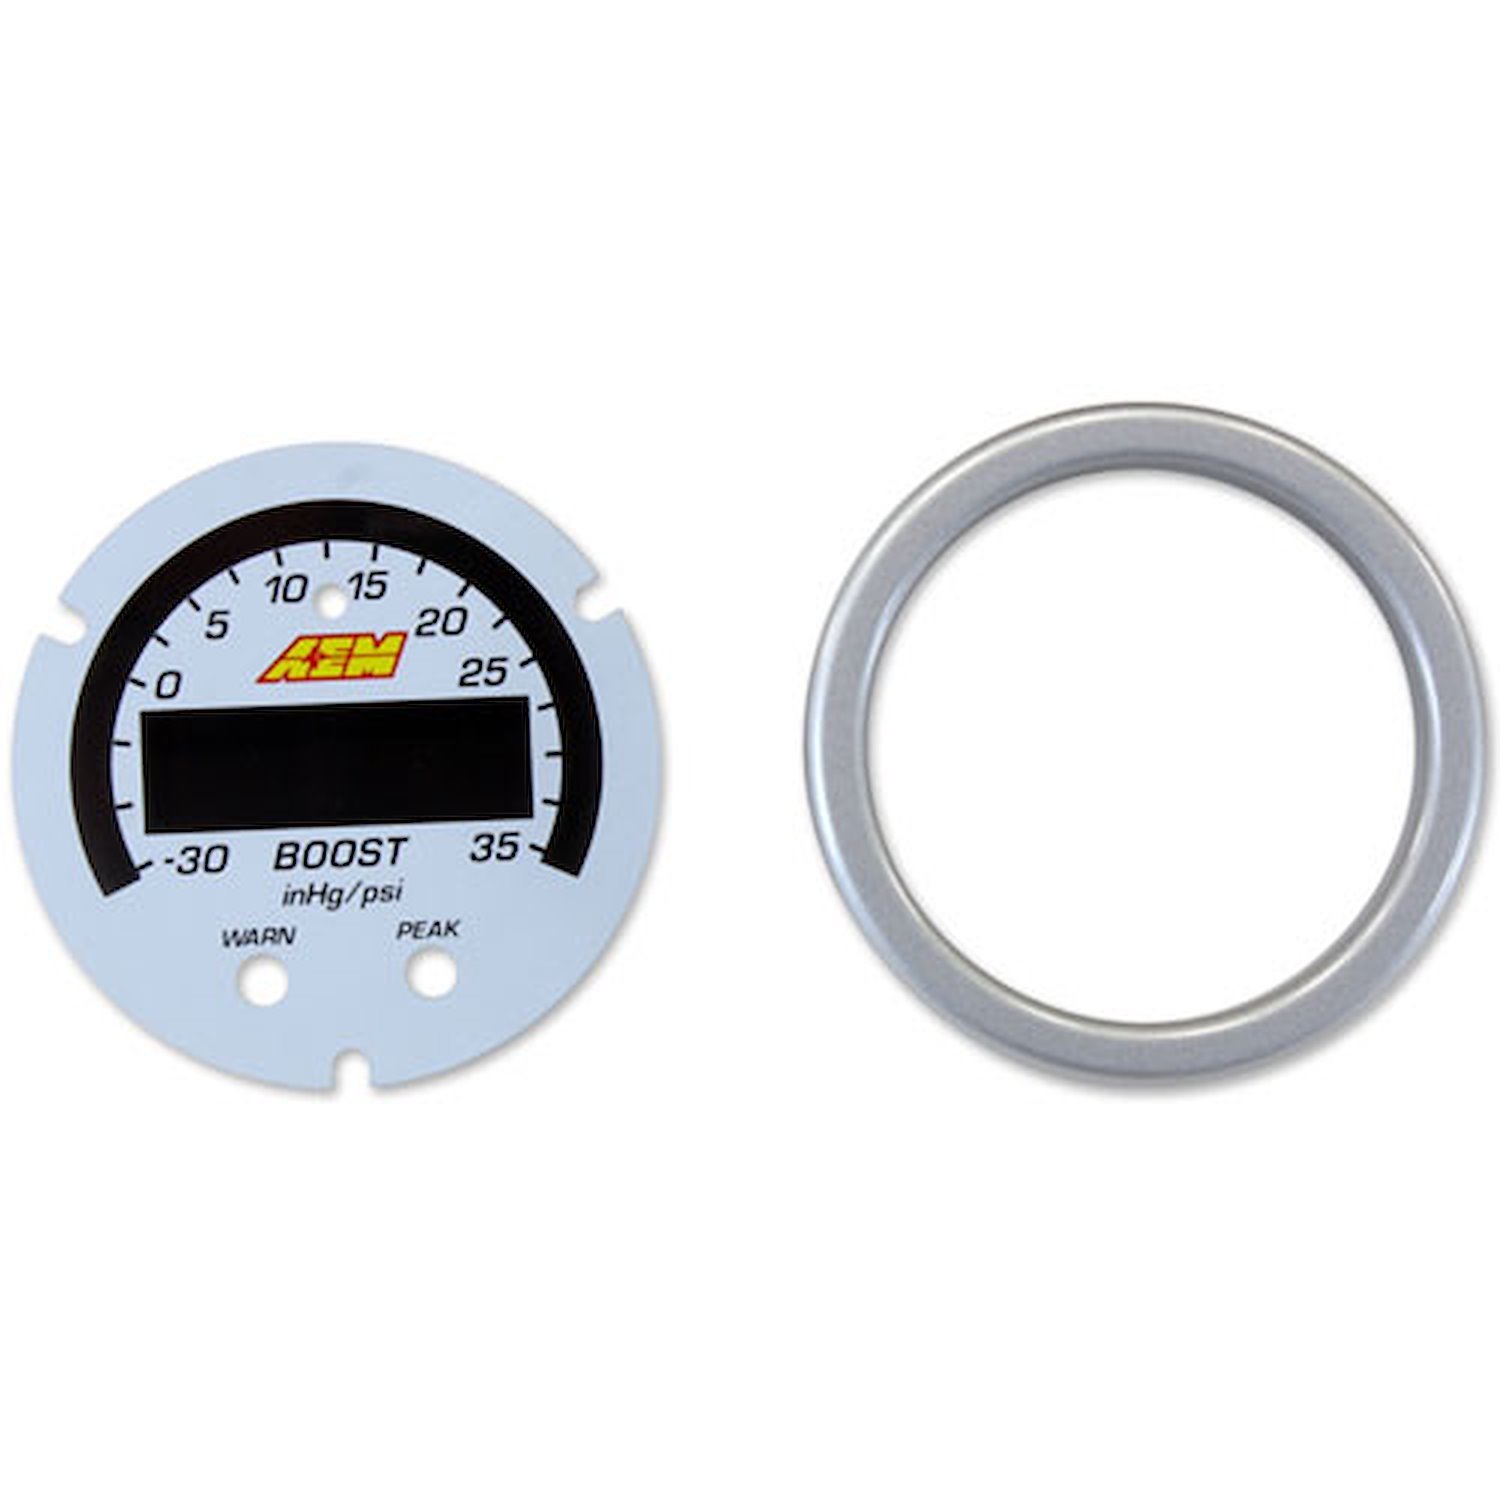 X-Series Boost Pressure Gauge Accessory Kit Includes Silver Bezel And White Faceplate